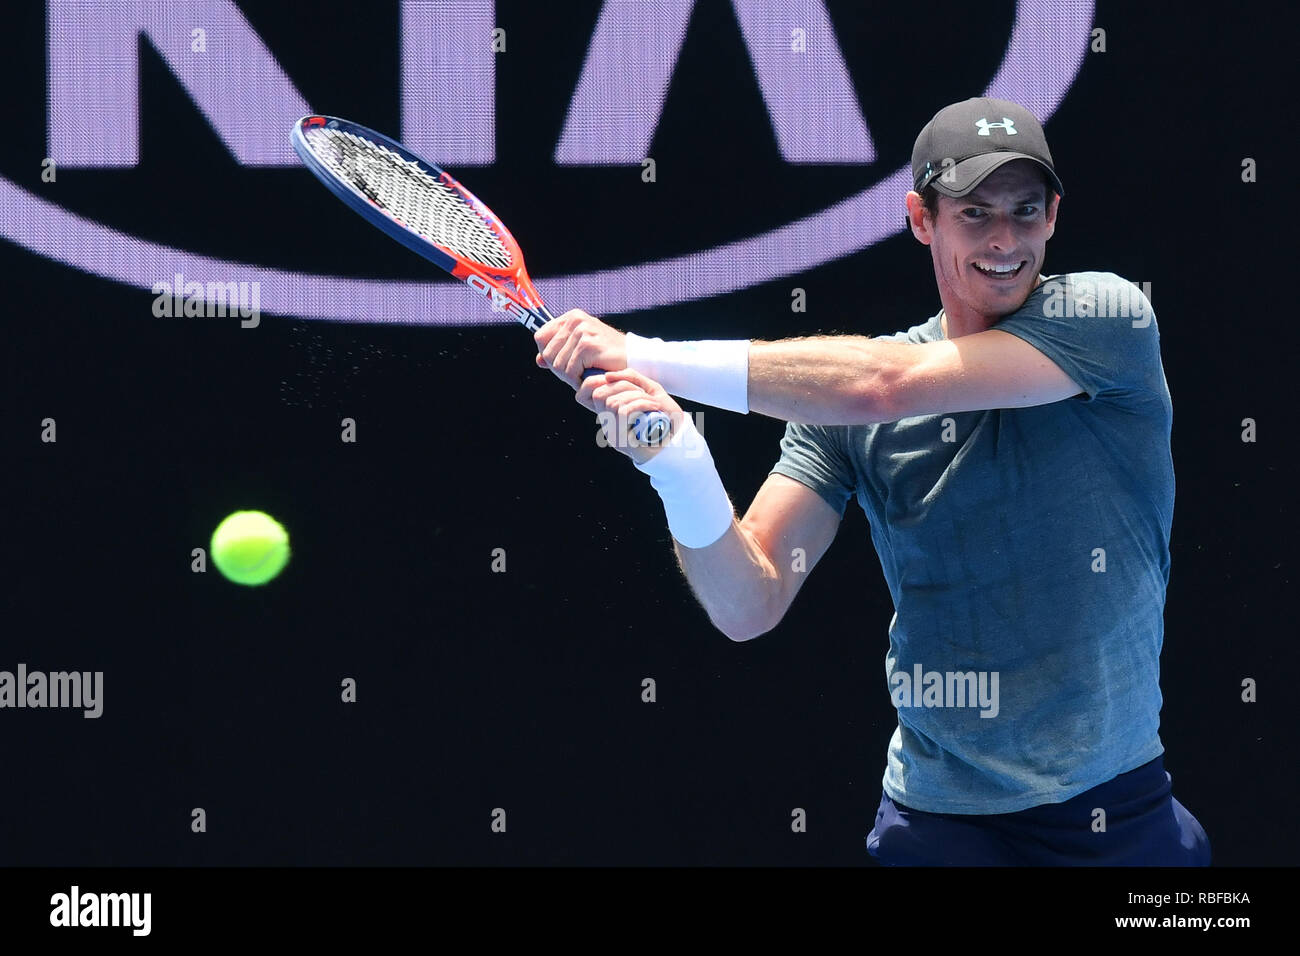 Melbourne, Australia. 10th Jan, 2019. Andy Murray in action in a practice match against number one seed Novak Djokovic on Margaret Court Arena ahead of the 2019 Australian Open Grand Slam tennis tournament in Melbourne, Australia. Sydney Low/Cal Sport Media/Alamy Live News Stock Photo